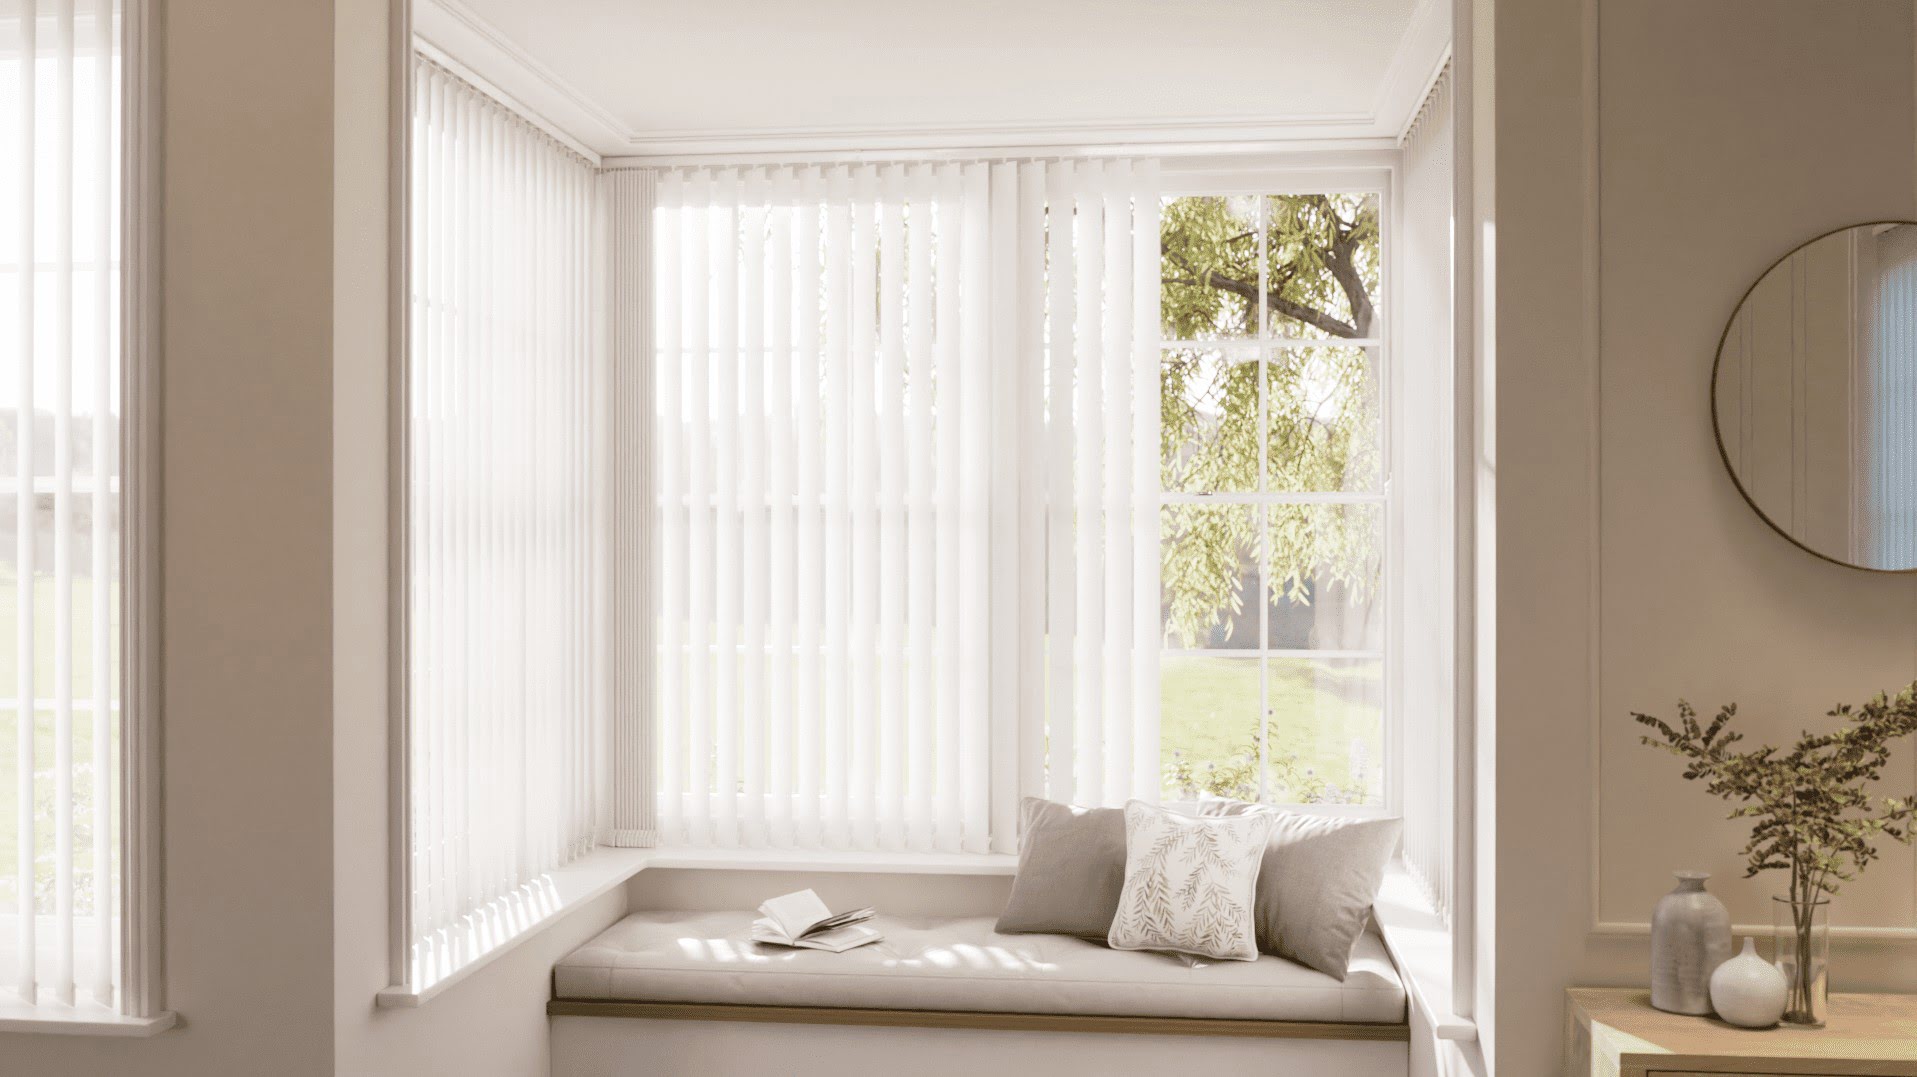 How To Put Blinds In A Bay Window